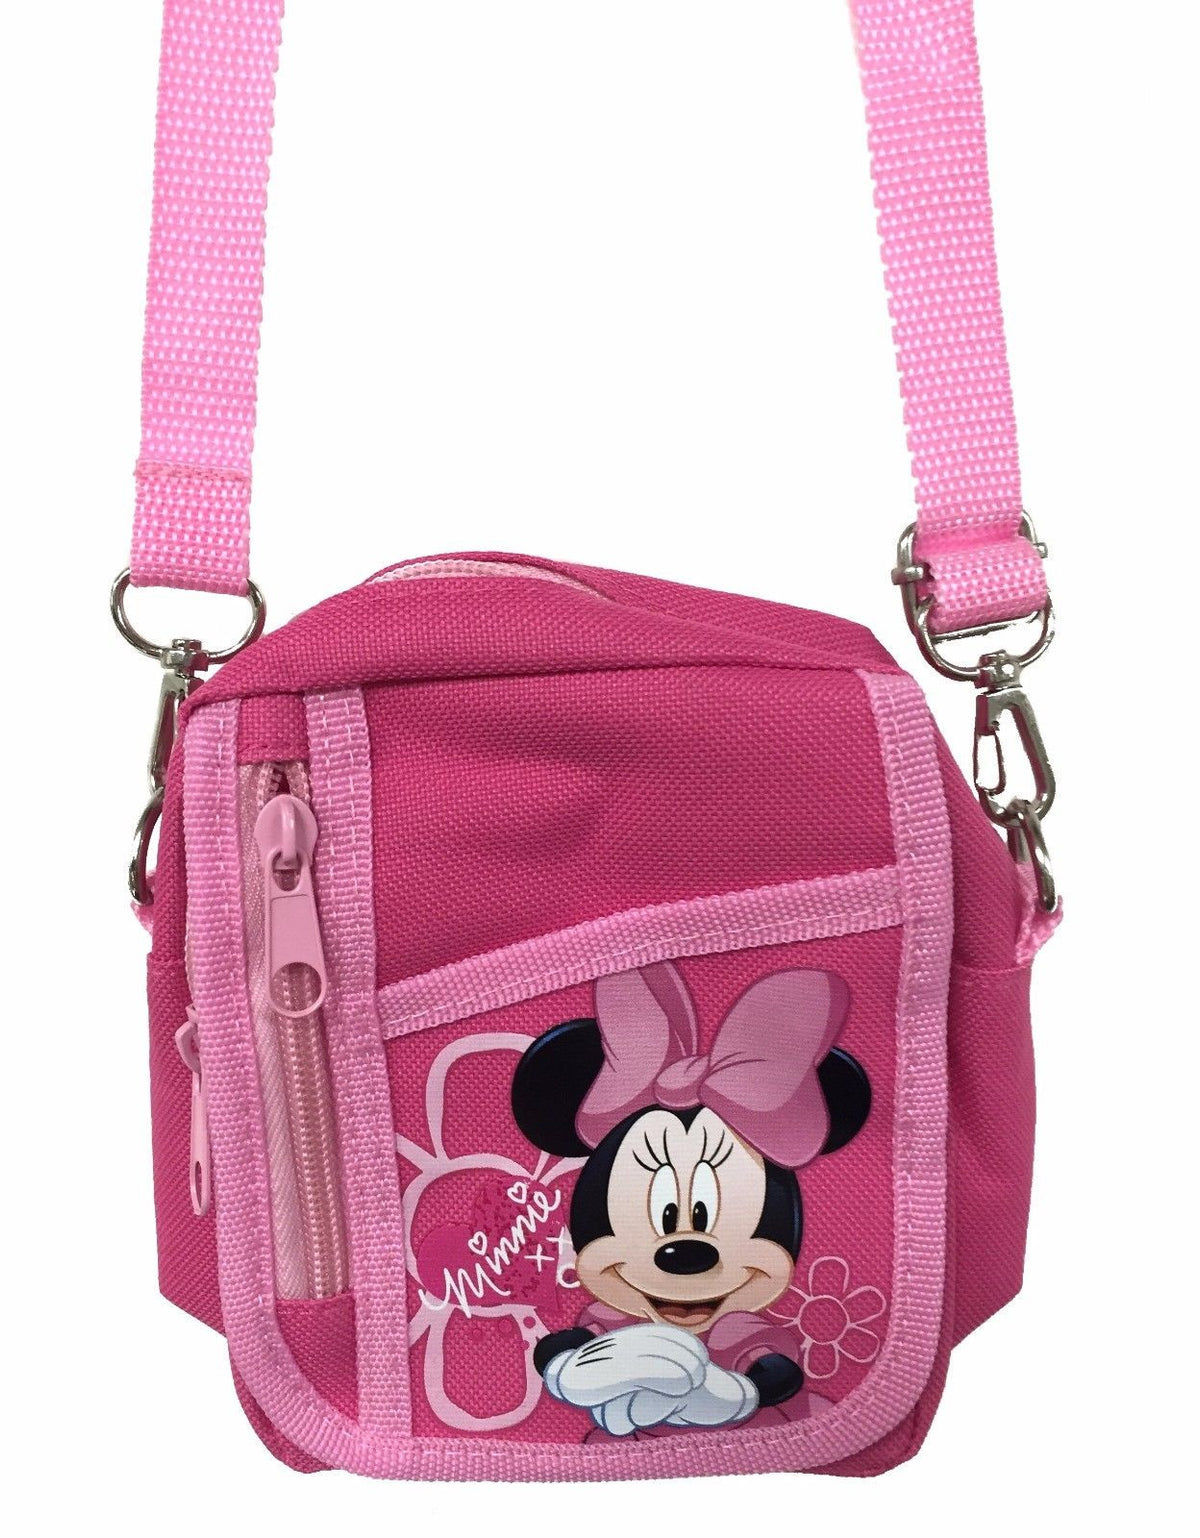 Buy Ondeam Little Mouse Ear Bow Crossbody Purse,PU Shoulder Handbag for  Kids Girls Toddlers(Black) at Amazon.in